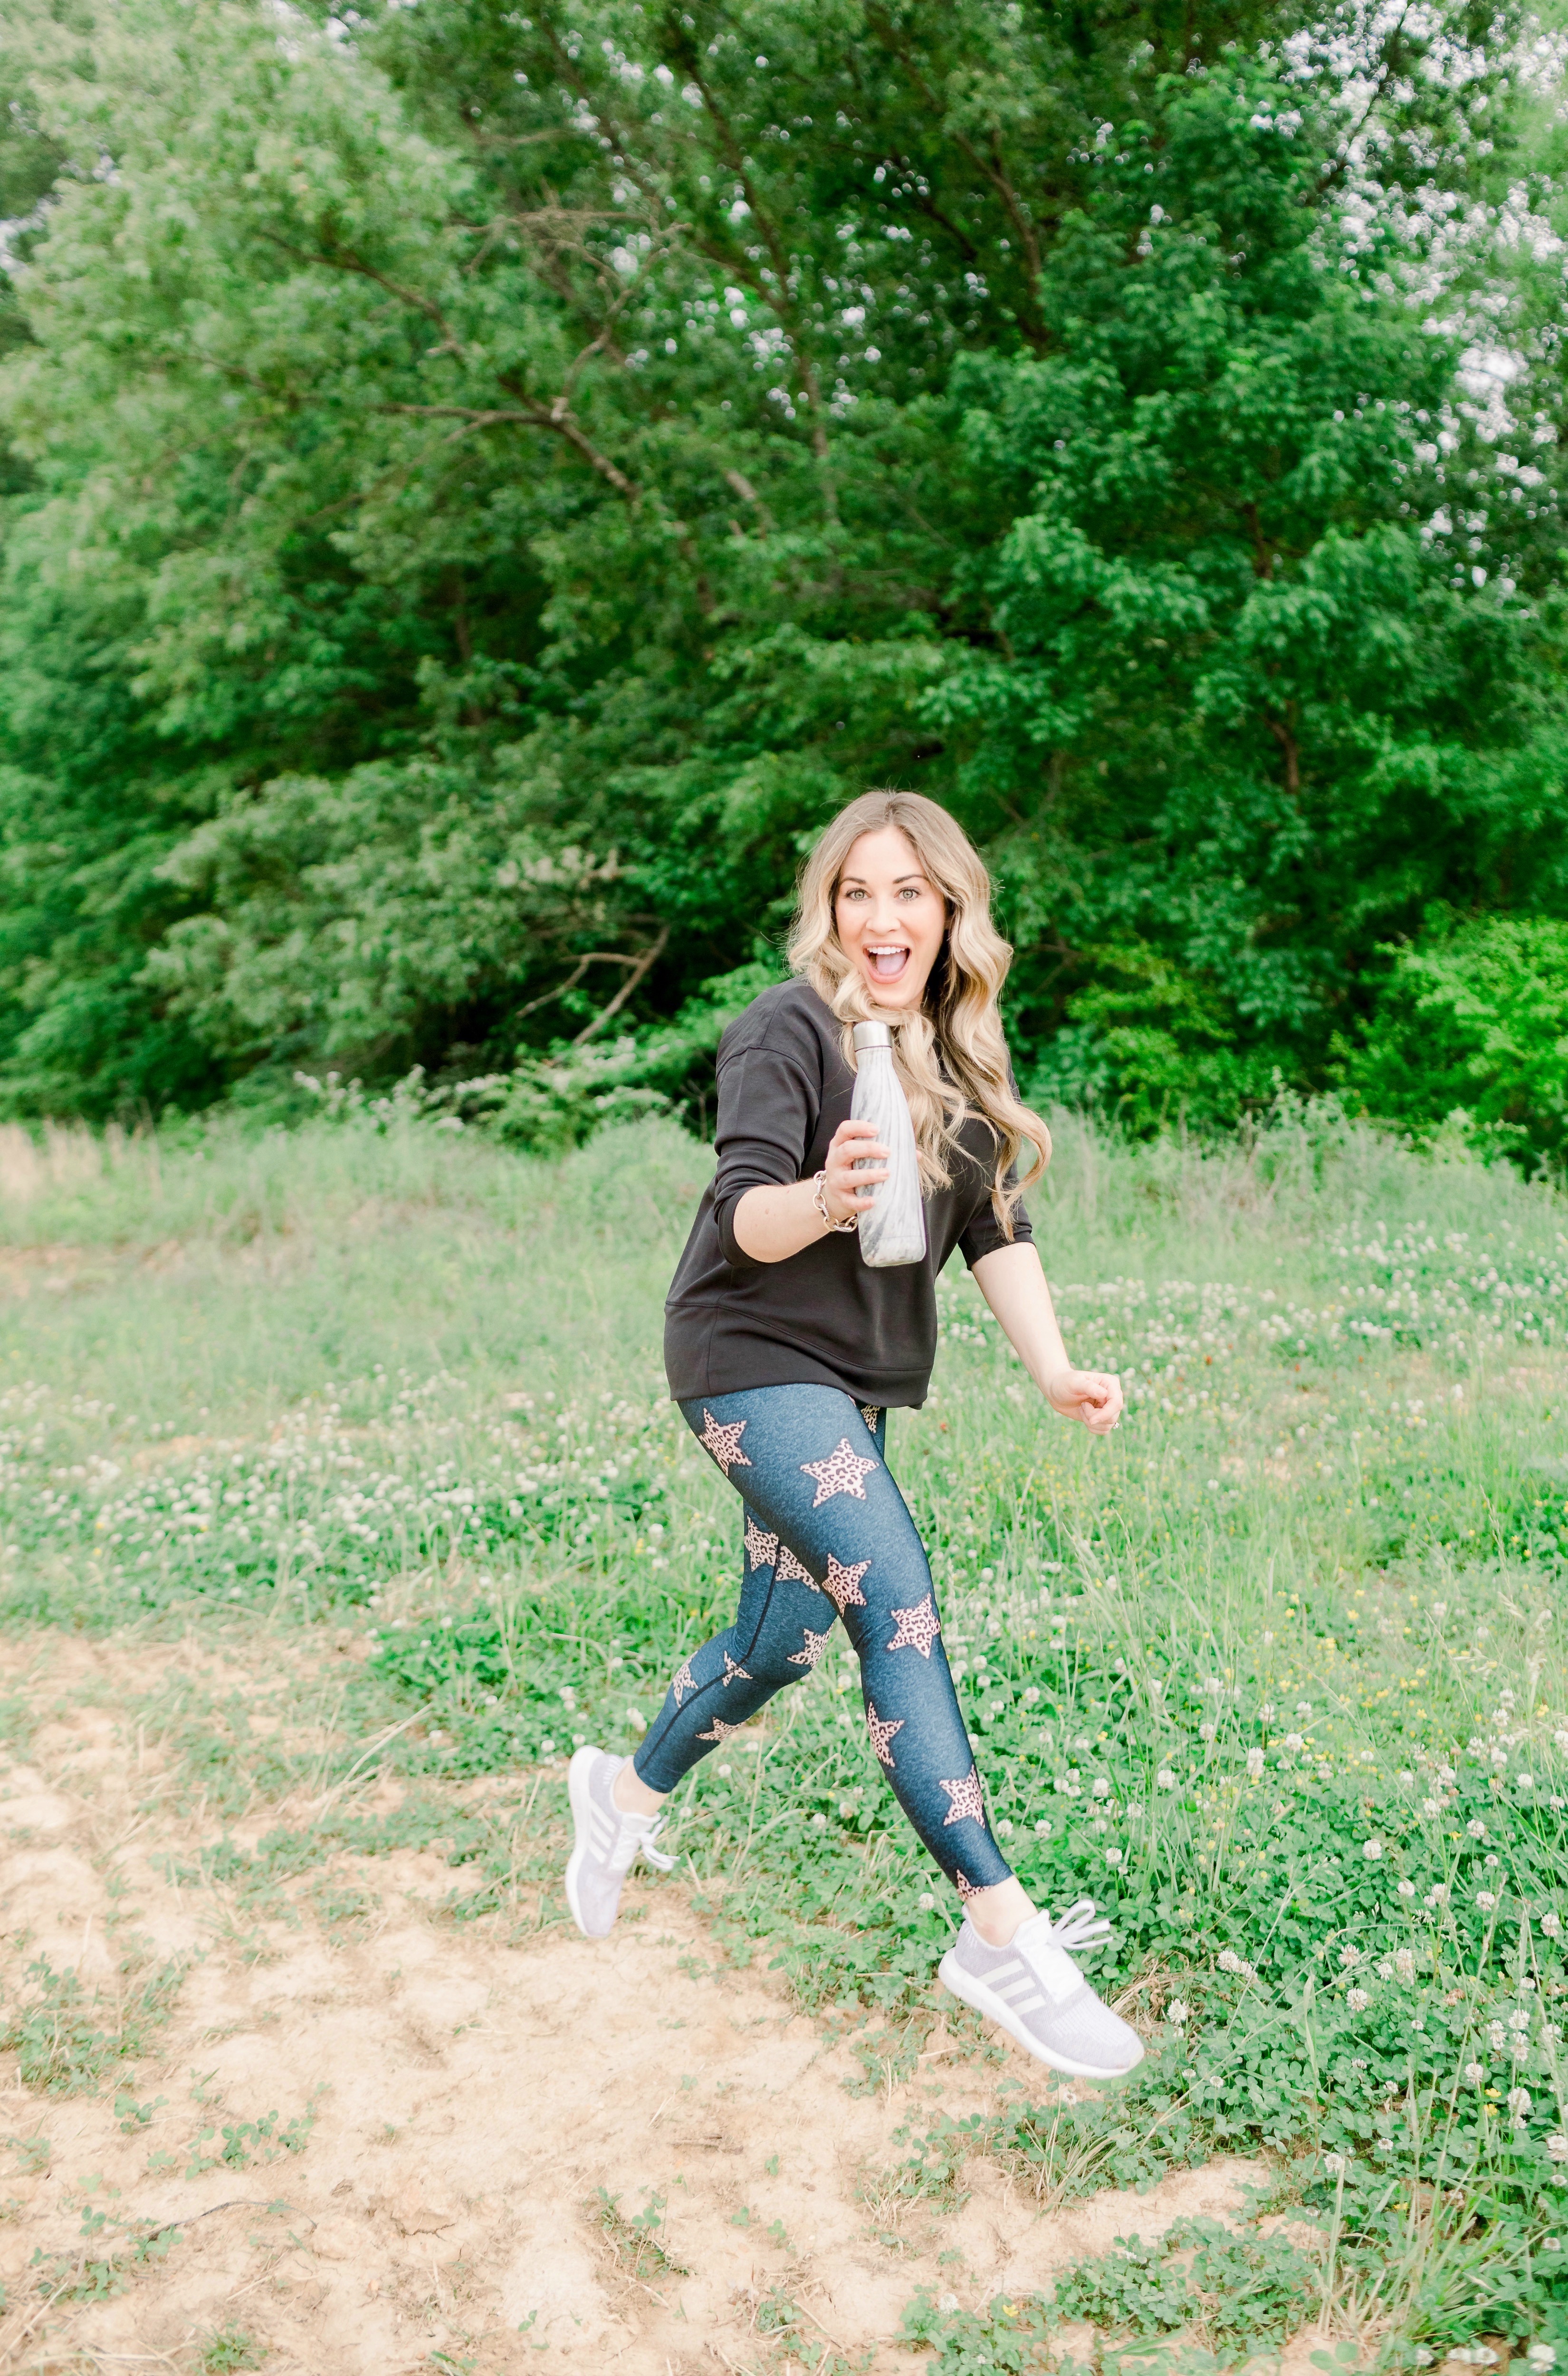 Casual spring look featured by top Memphis fashion blog, Walking in Memphis in High Heels: image of a woman wearing Adidas swift run shoes, CALIA by Carrie Underwood Sweater, and PixieLane star leggings.